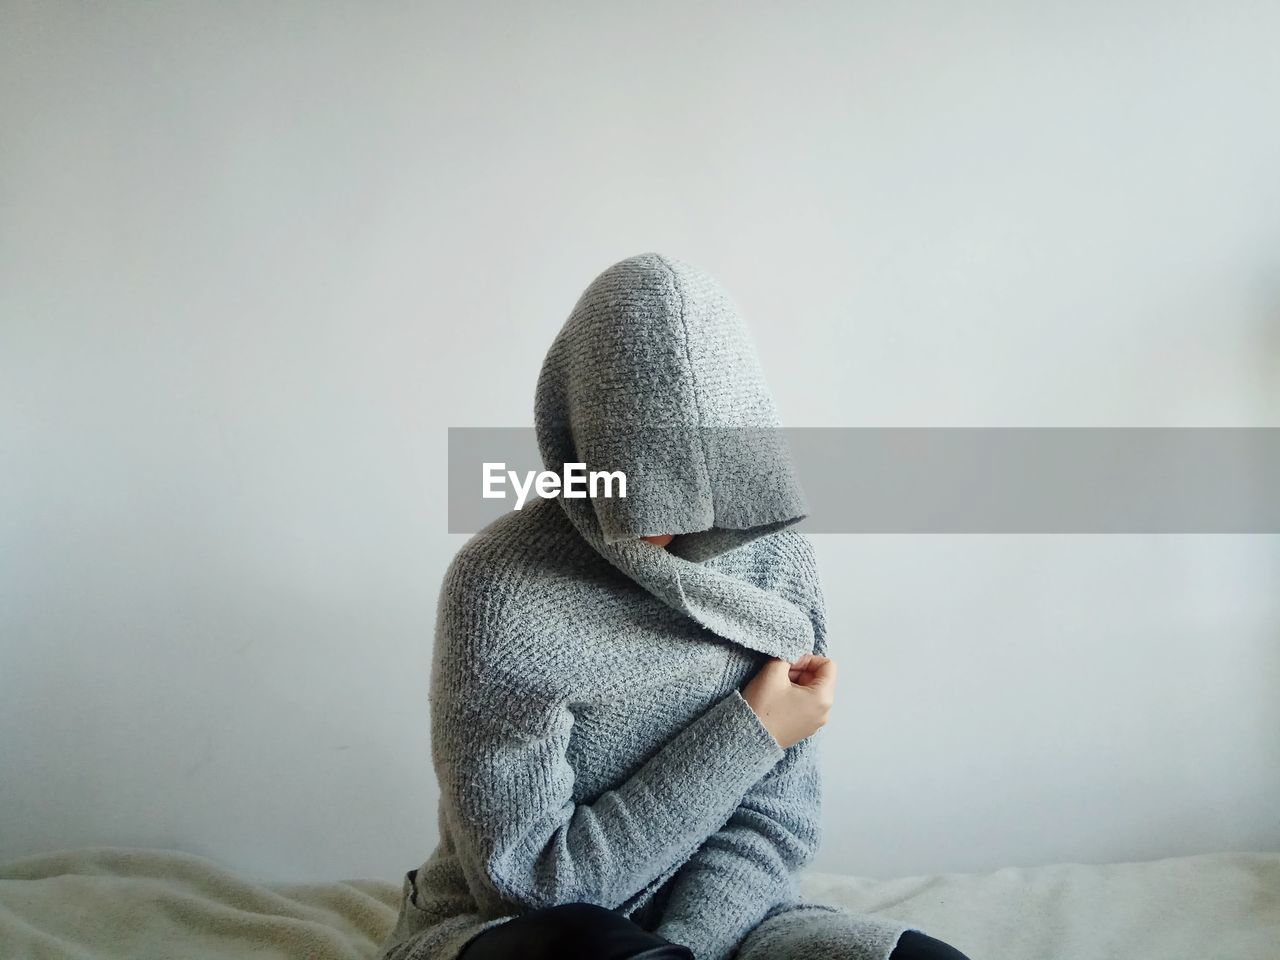 Person wearing warm clothing sitting on bed against wall